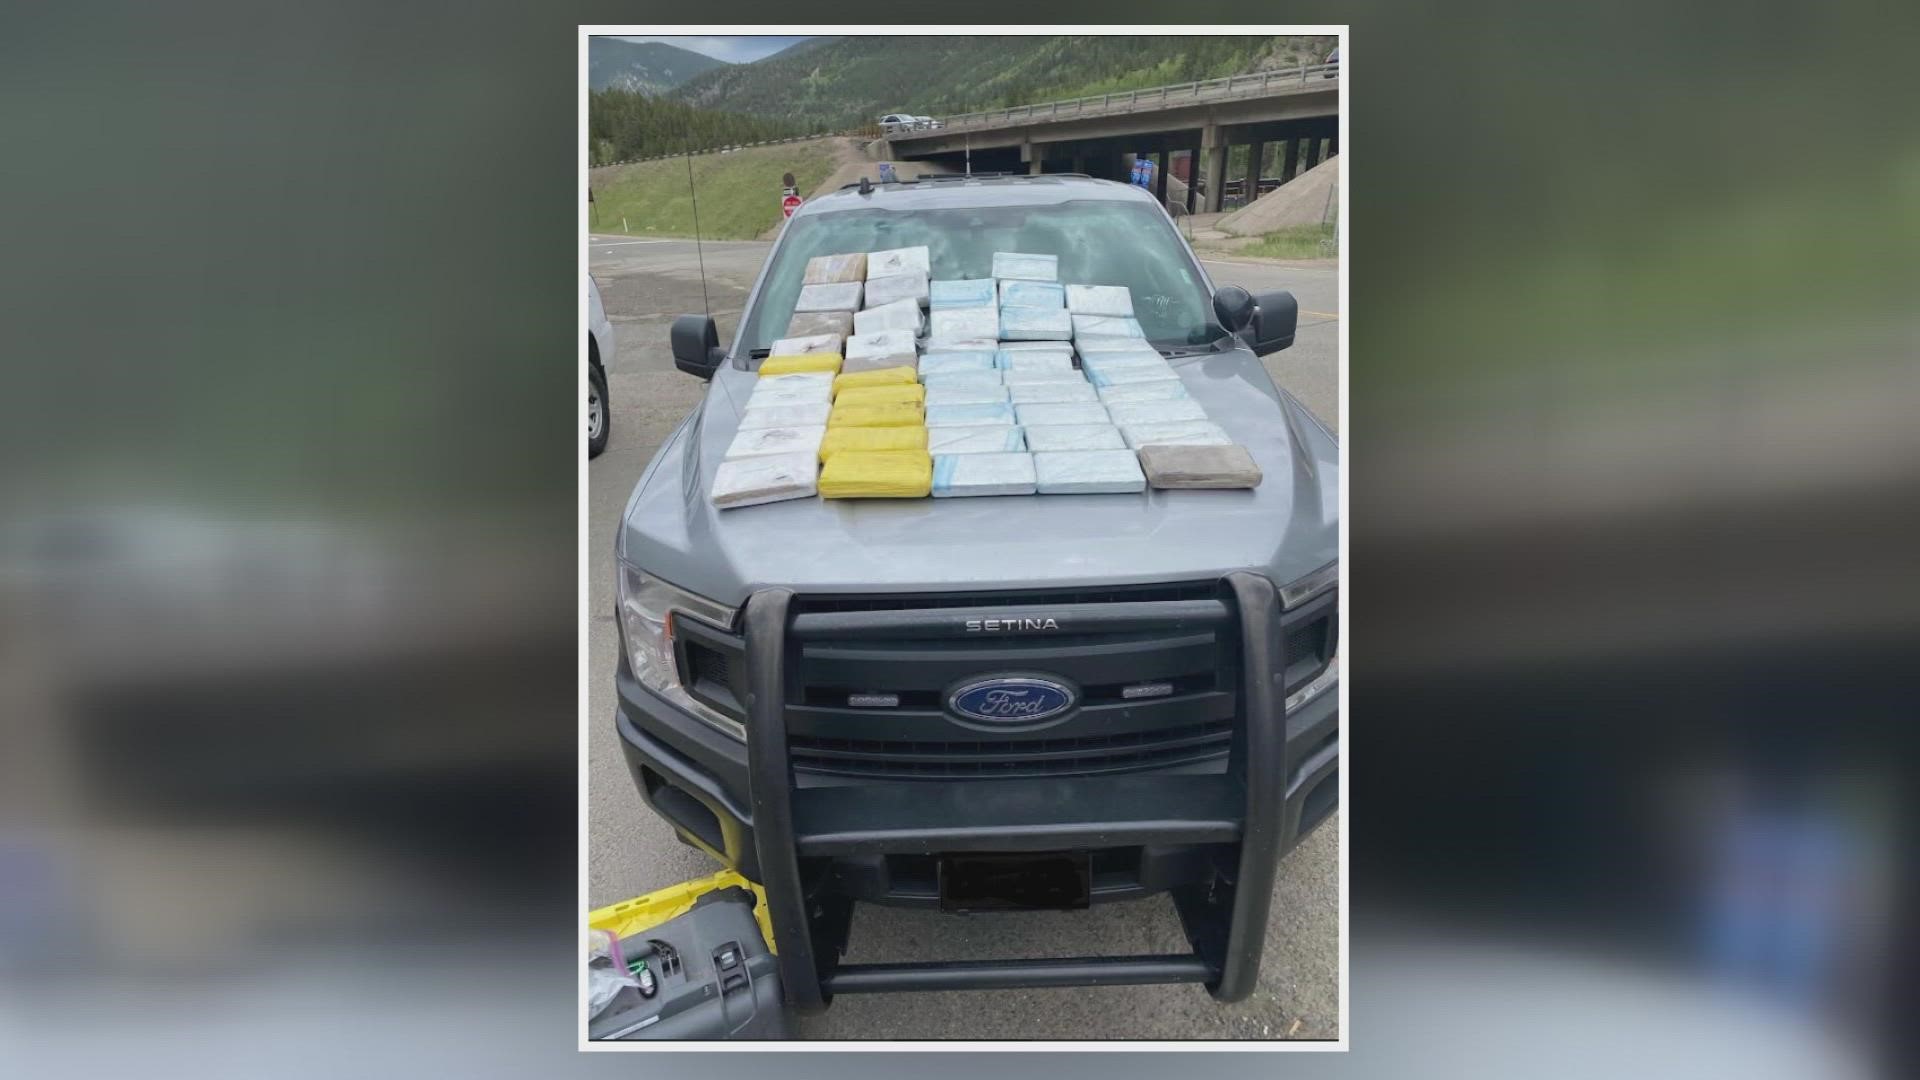 Authorities allowed the driver who was caught ferrying a record haul of pure fentanyl to continue his trip in hopes he would lead them to drug kingpins in Indiana.